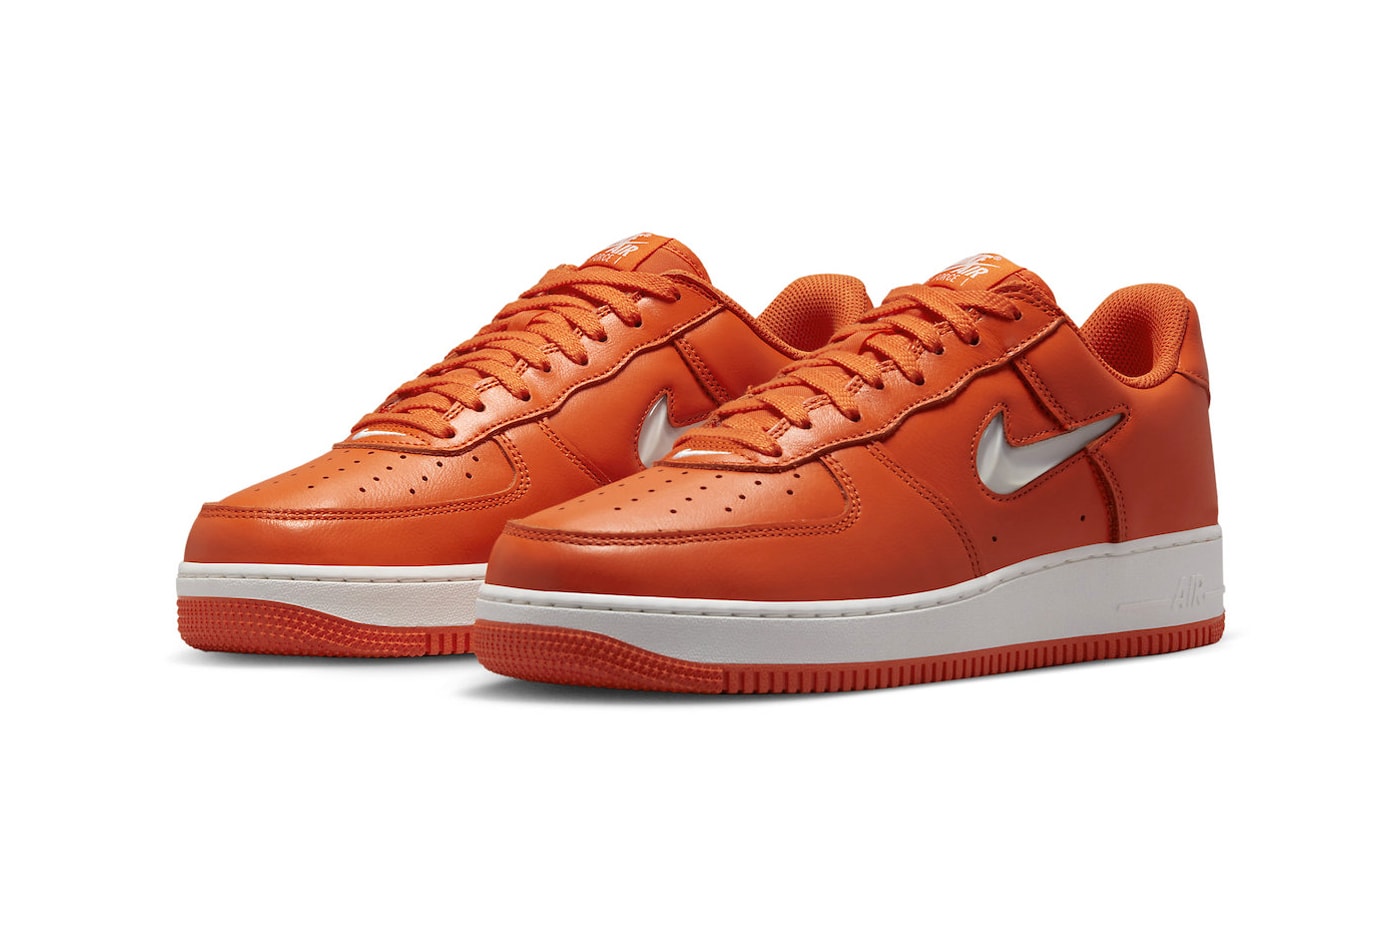 nike air force 1 orange jewel leather fj1044 800 color of the month 40th anniversary mesh toothbrush release info